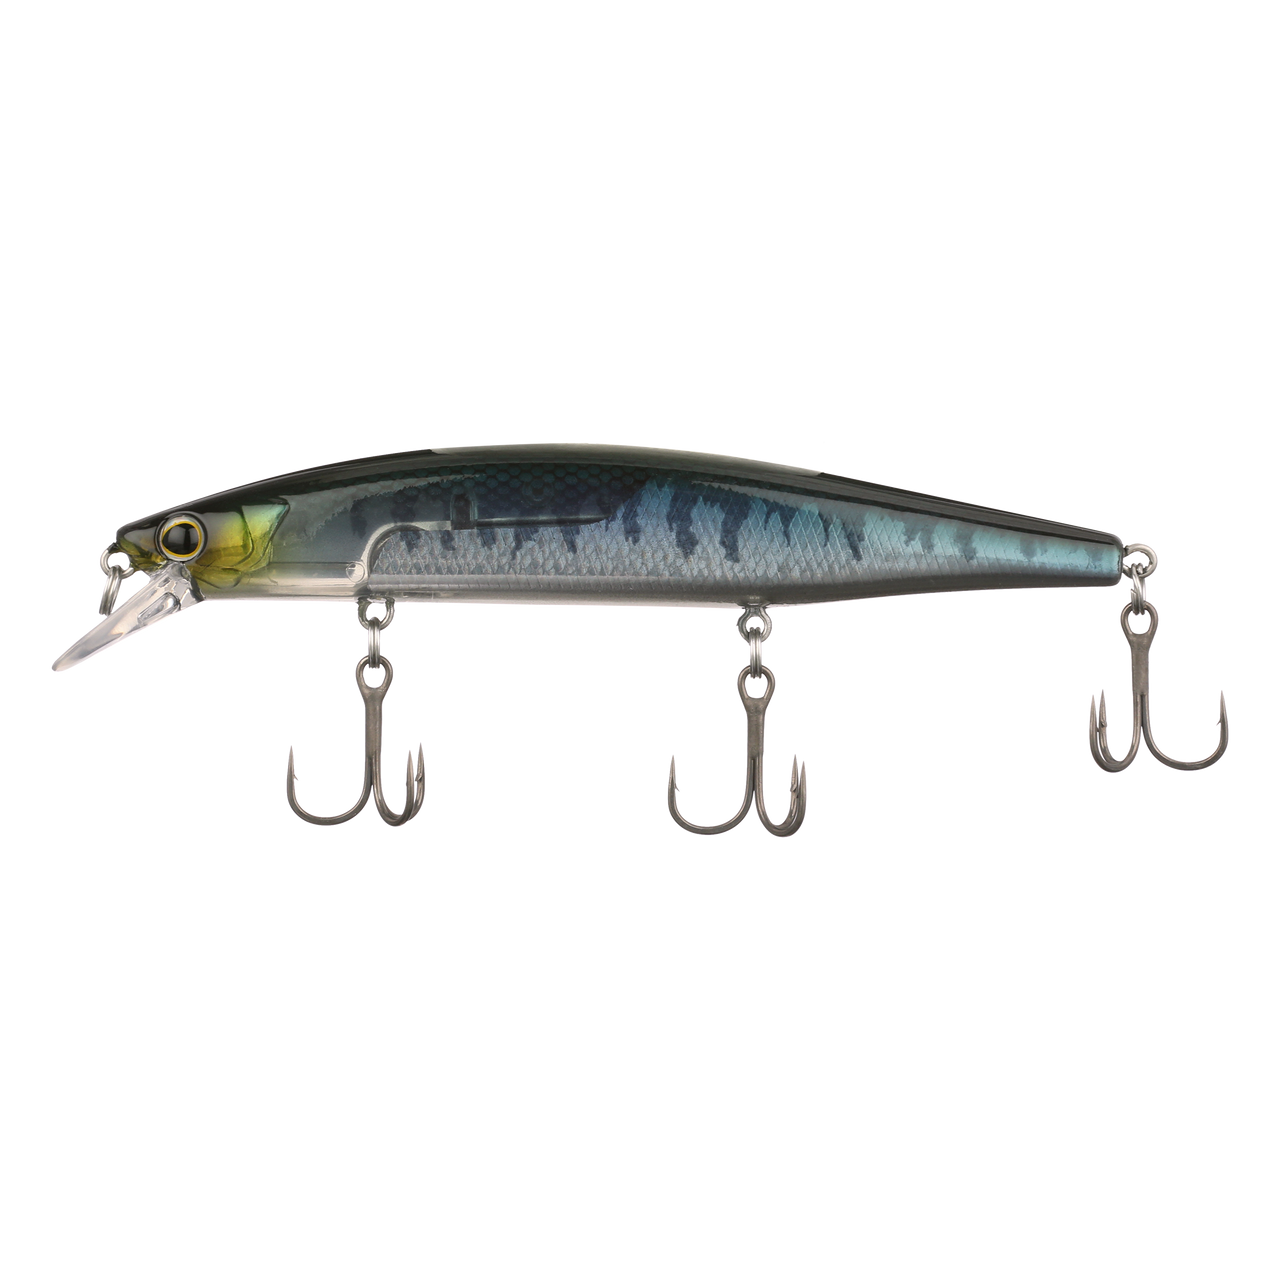 https://cdn11.bigcommerce.com/s-i6ykqoitnd/images/stencil/1280x1280/products/10965/64365/FishShimano-WORLD-MINNOW-S-HASU-primary__90164.1695150085.png?c=1&imbypass=on